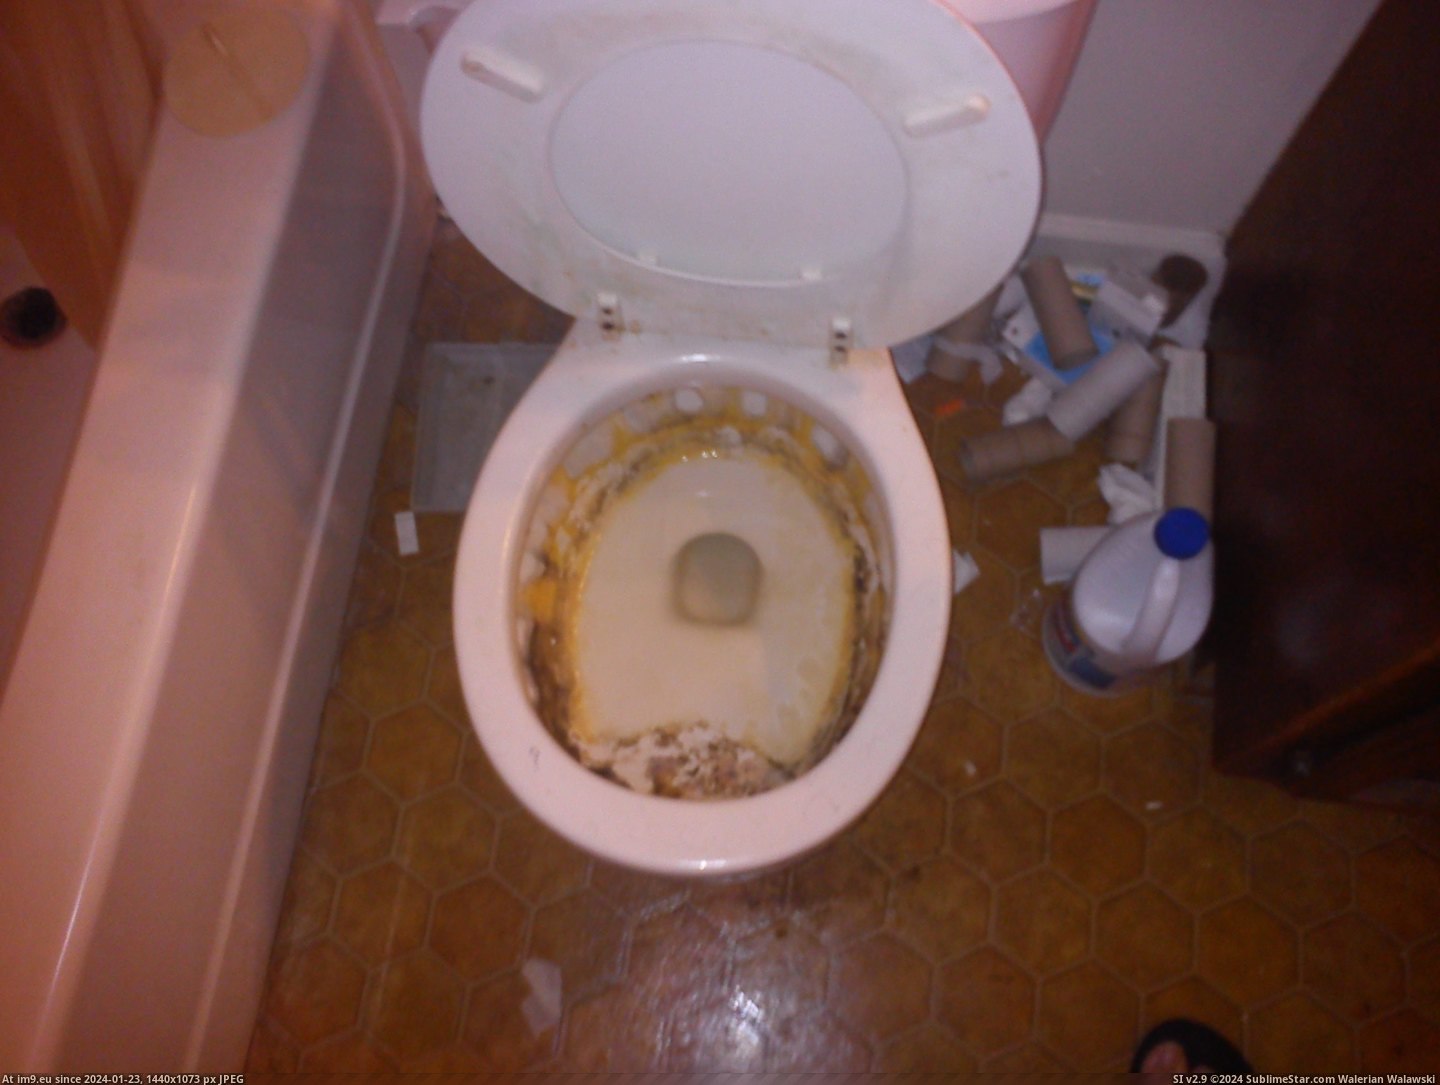 #Wtf #Summer #Roommate #Lives #Asked #Clean [Wtf] This is how my roommate lives. We've asked him to clean it since last summer, and he doesn't want to do it without help. H Pic. (Изображение из альбом My r/WTF favs))